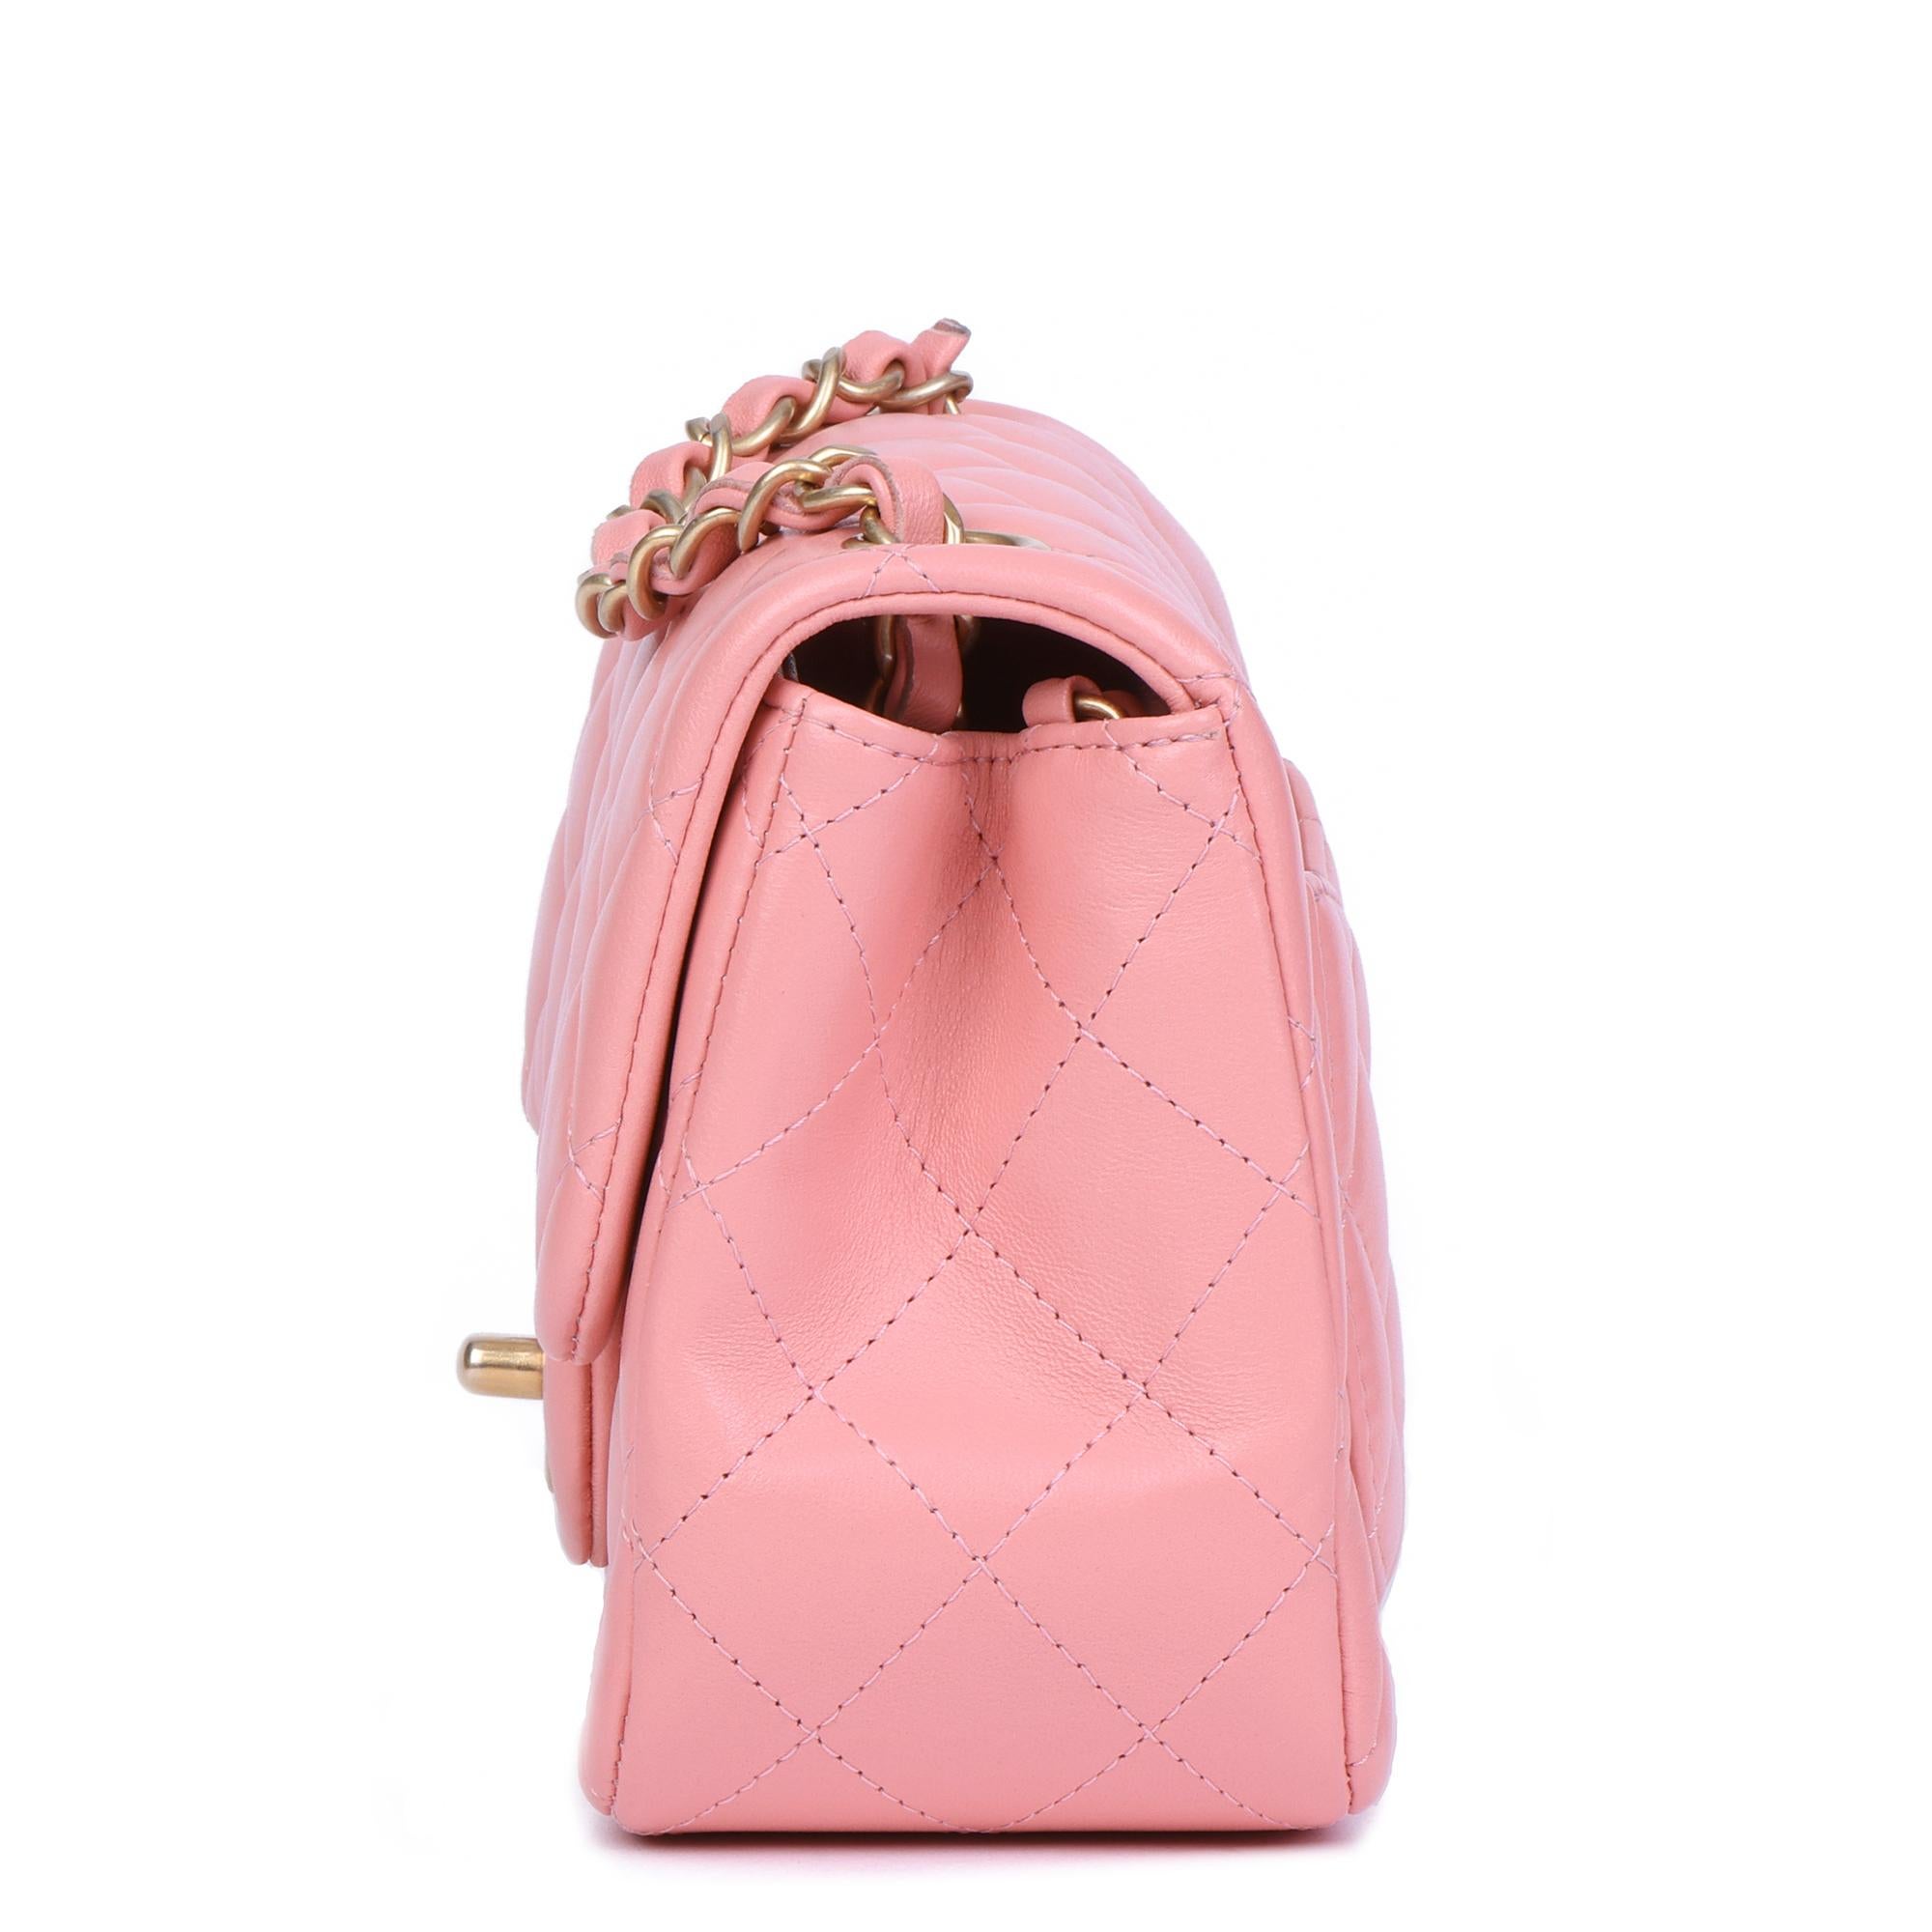 CHANEL
Pink Quilted Lambskin Leather Mini Flap Bag

Xupes Reference: HB4040
Serial Number: 27904057
Age (Circa): 2019
Accompanied By: Chanel Dust Bag, Box, Authenticity Card, Protective Felt
Authenticity Details: Authenticity Card, Serial Sticker